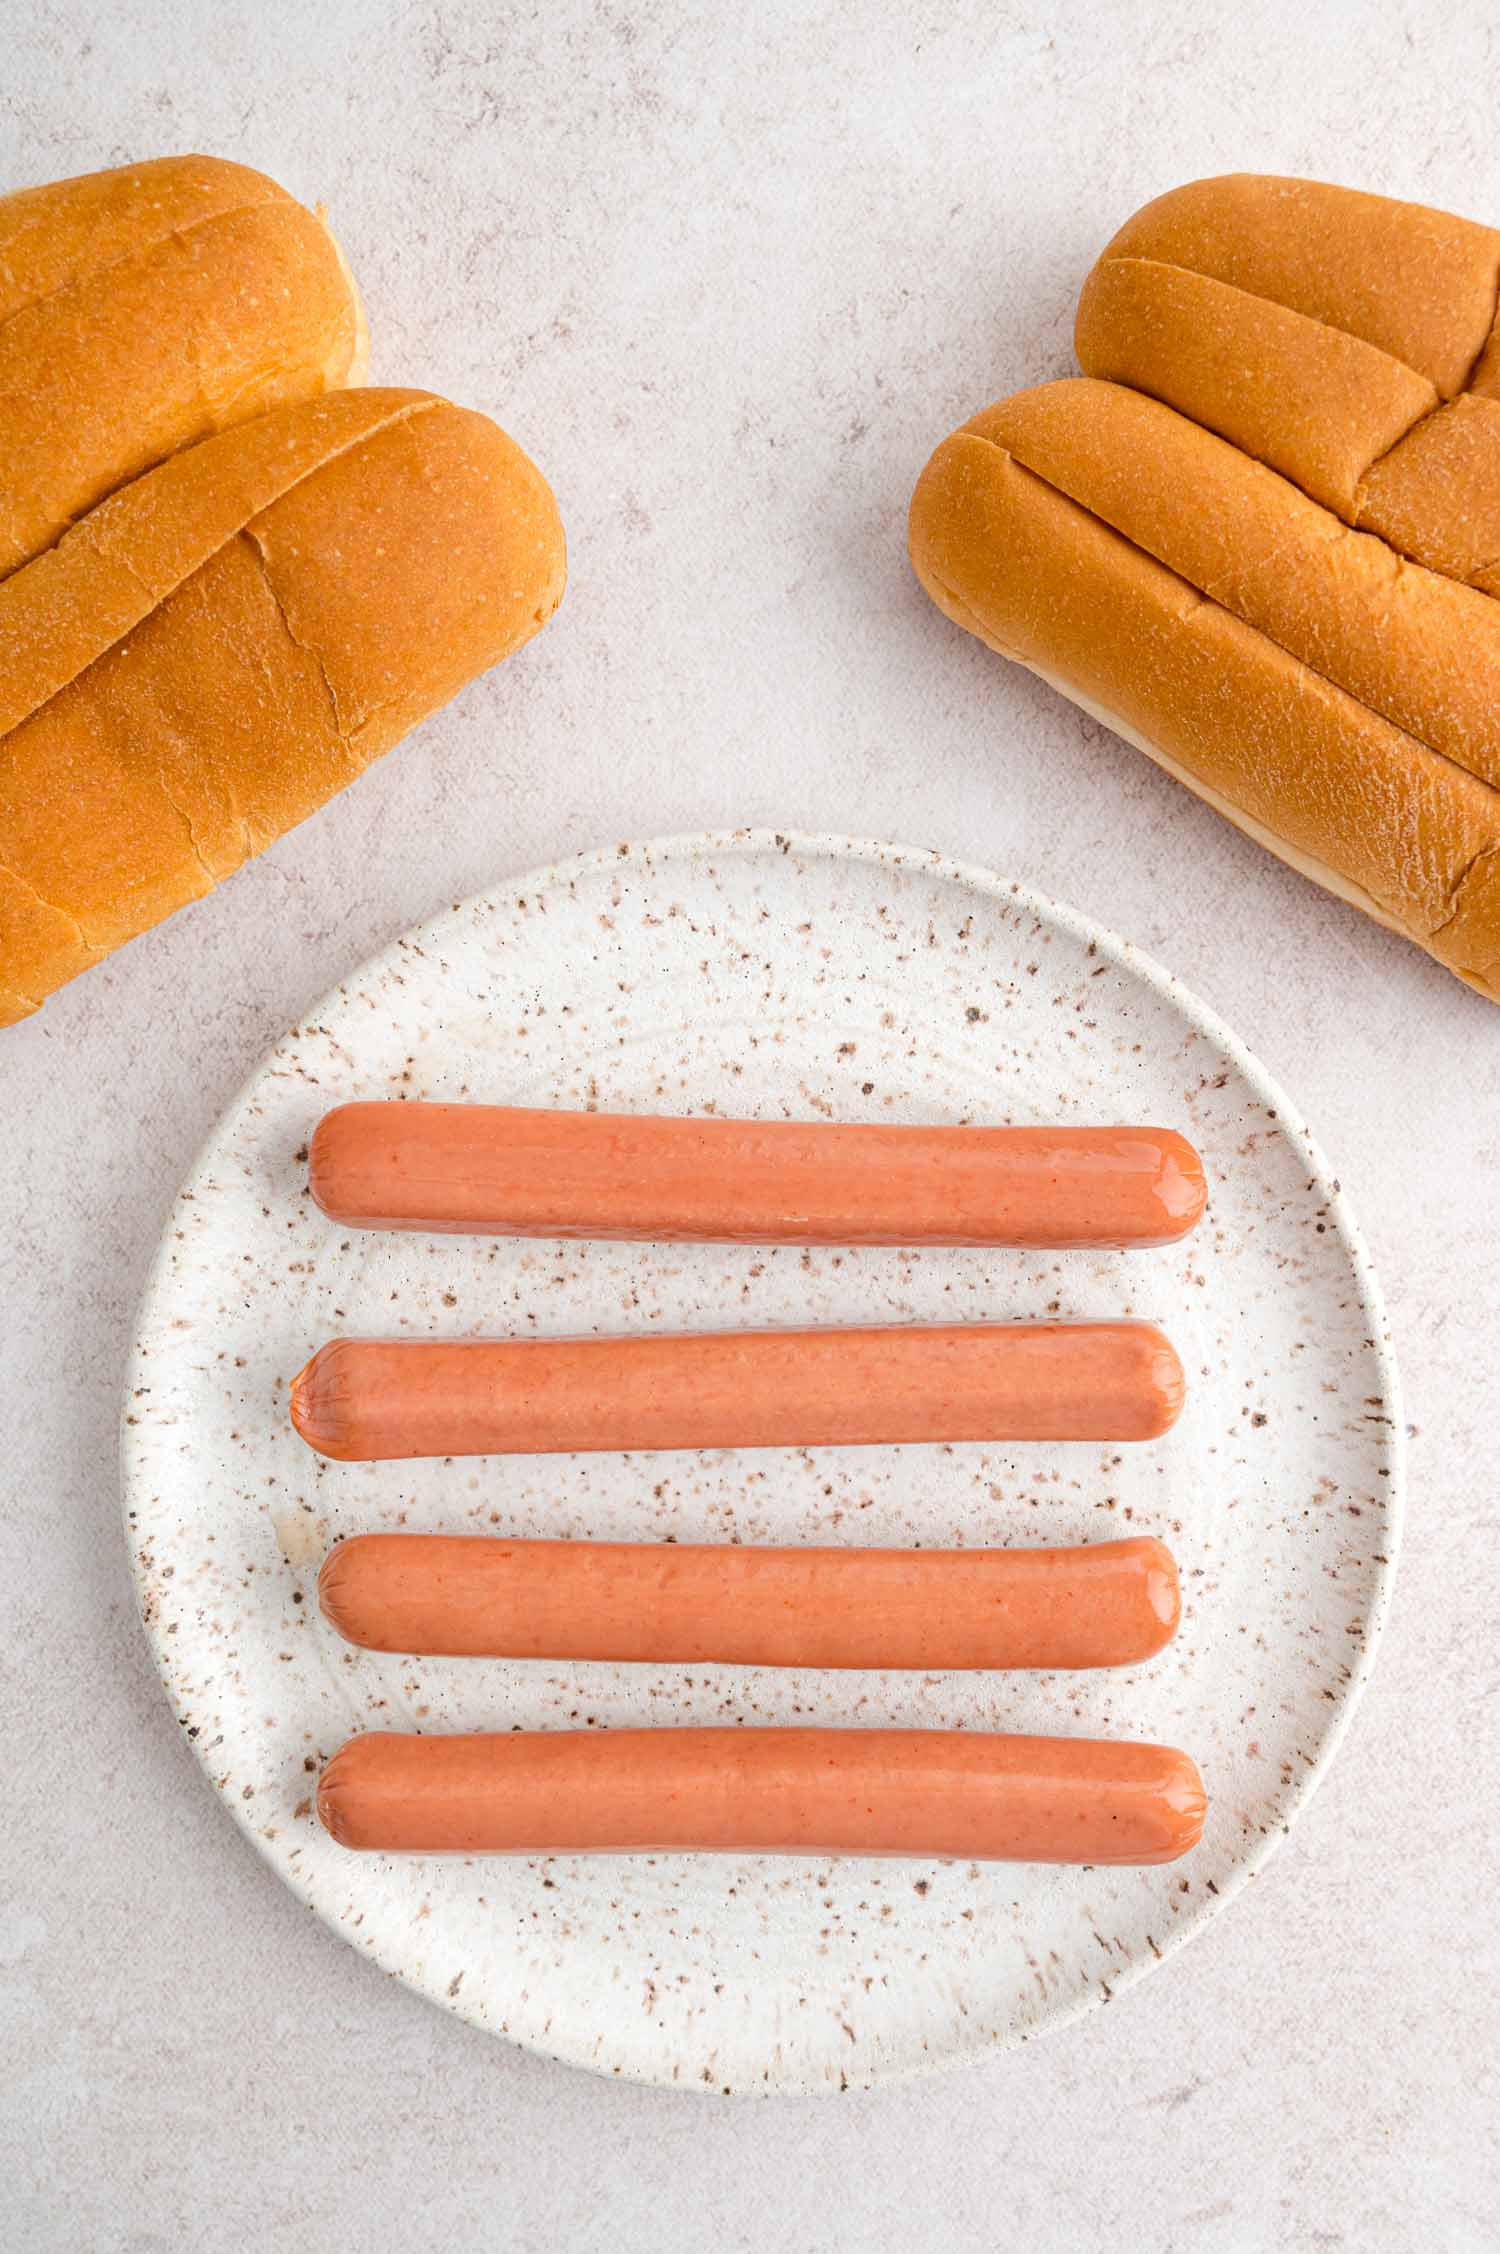 Uncooked hot dogs and buns.